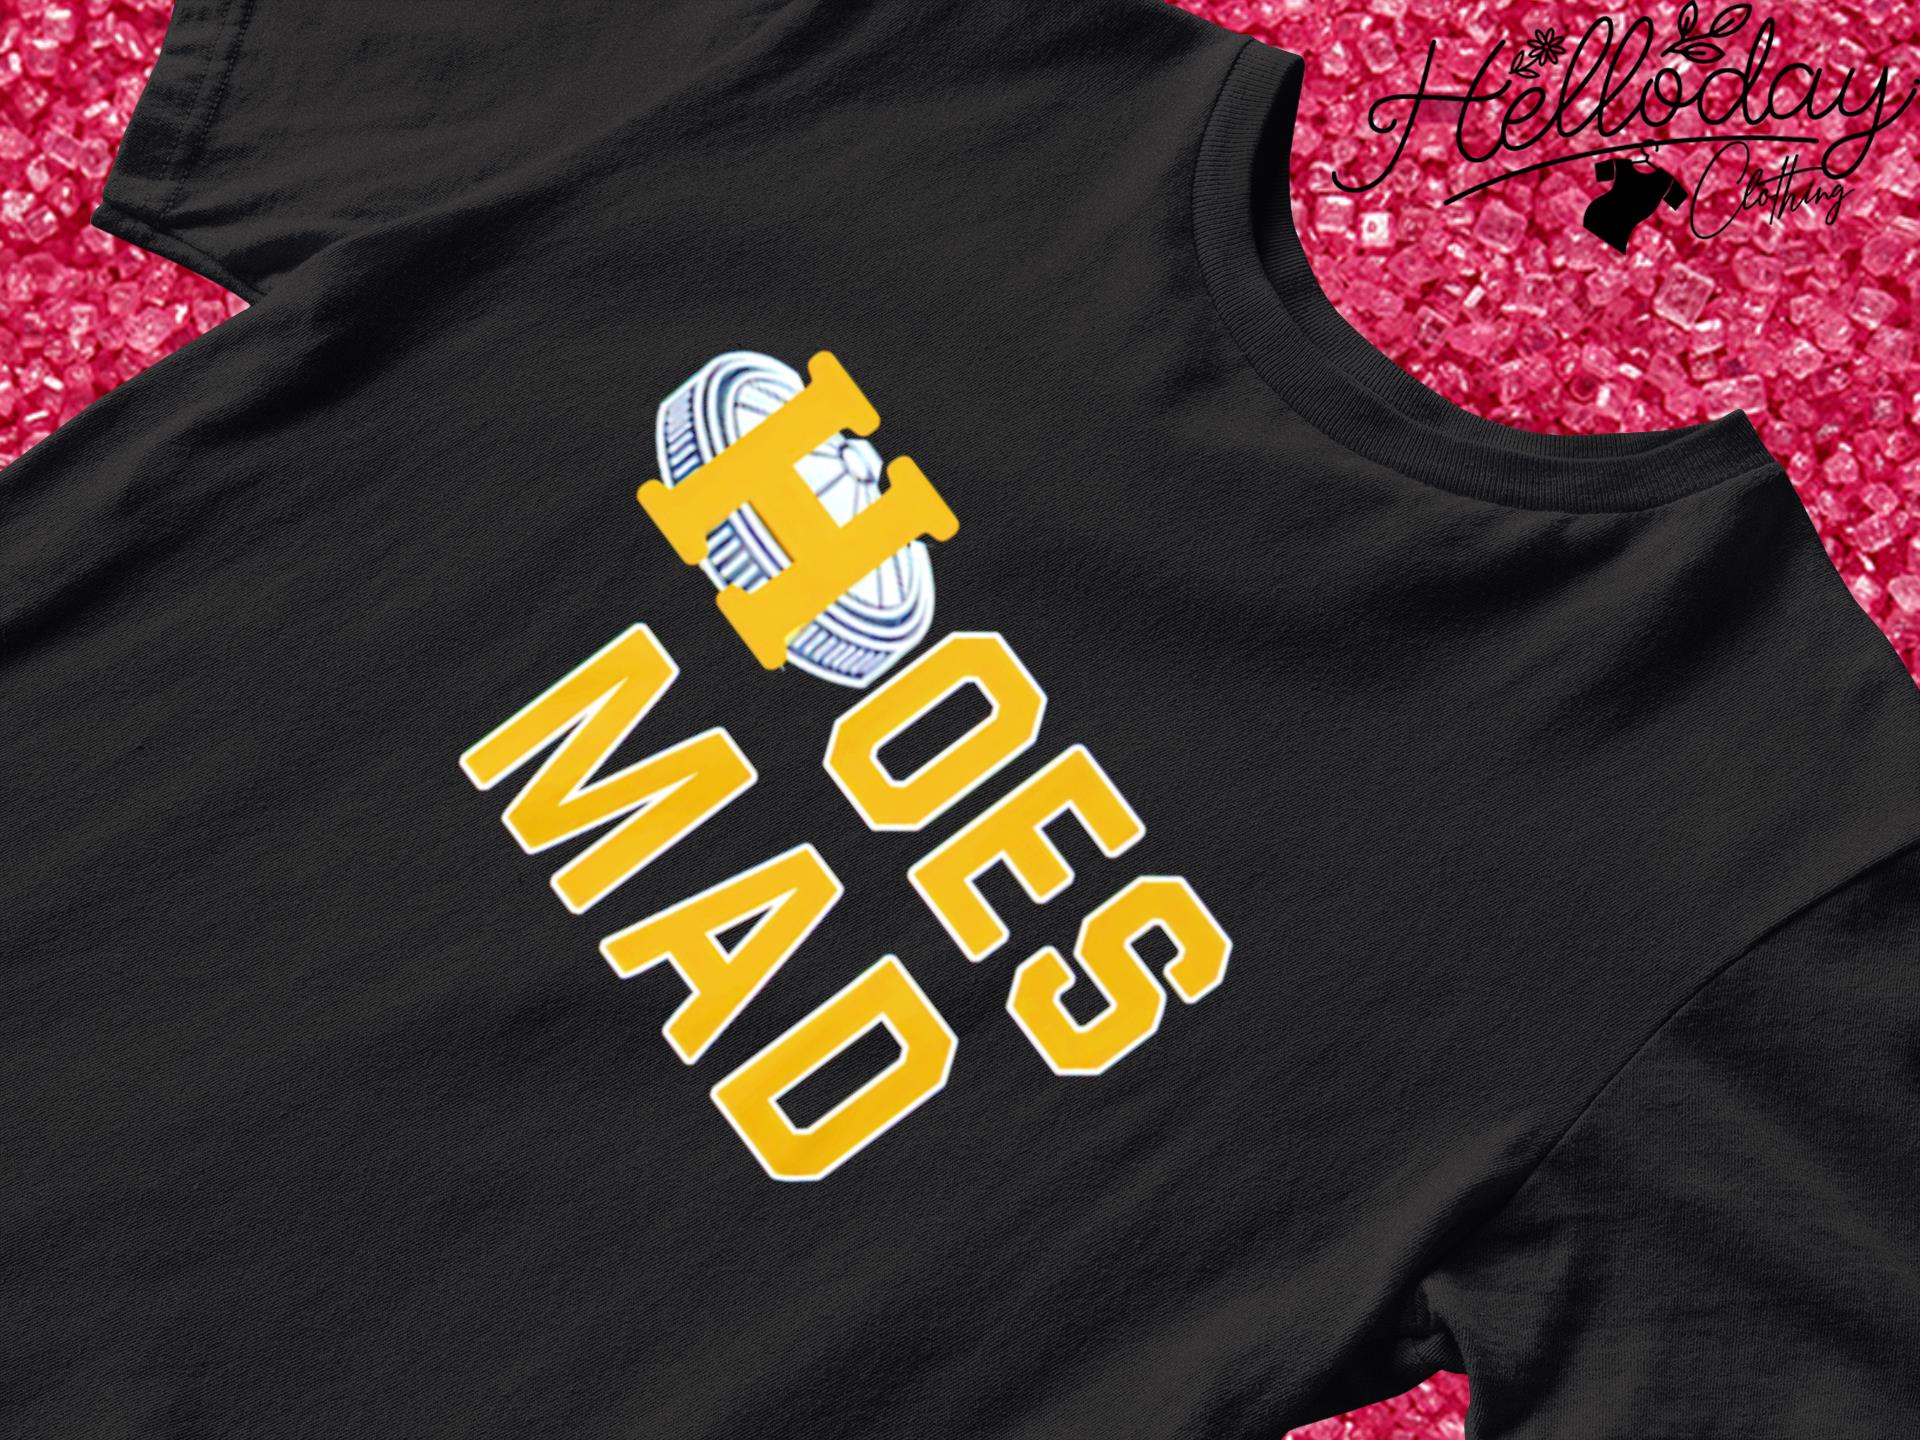 Hoes Mad Houston Astros shirt, hoodie, sweater, long sleeve and tank top